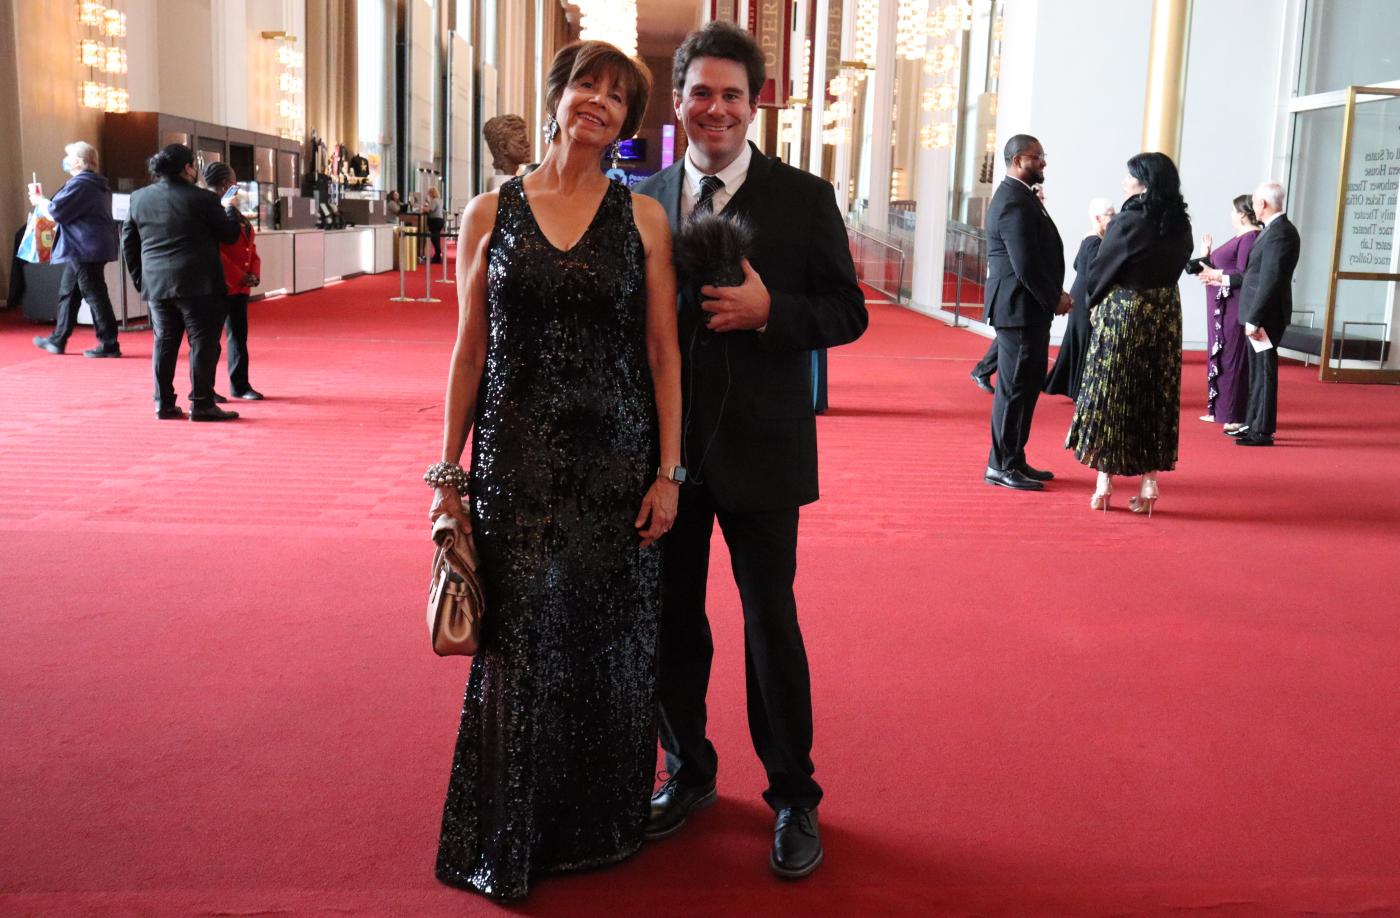 WETA Classical's Nicole Lacroix and John Banther at the gala